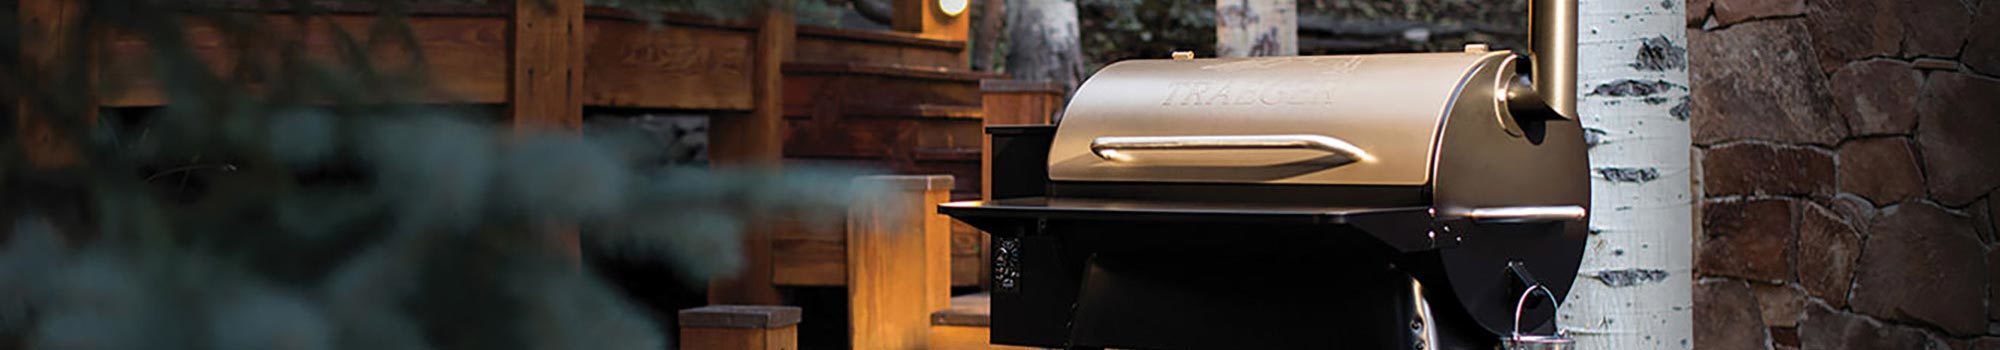 6 Tips to Get Your Grill Ready for Summer